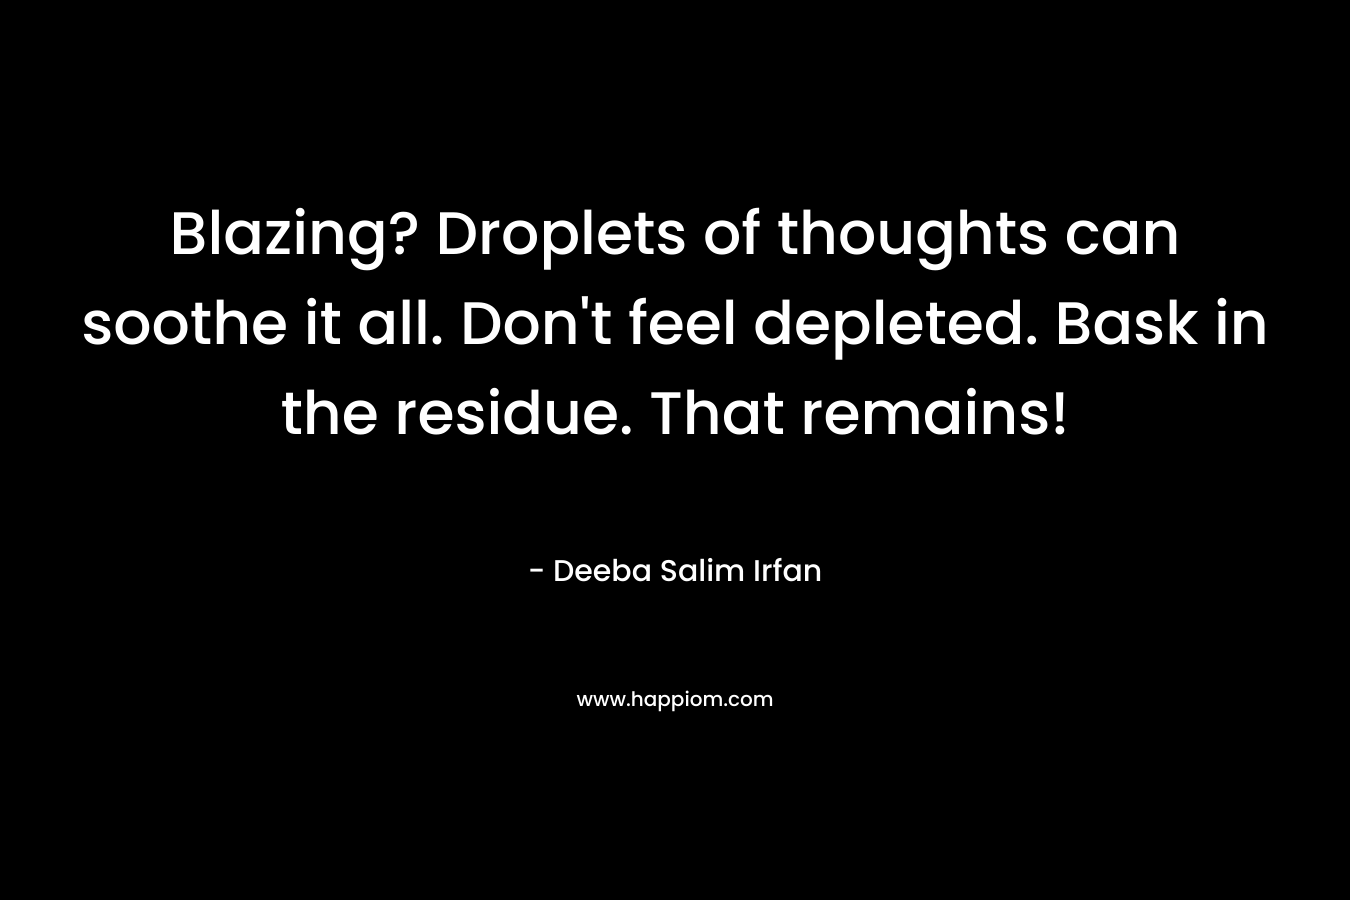 Blazing? Droplets of thoughts can soothe it all. Don’t feel depleted. Bask in the residue. That remains! – Deeba Salim Irfan